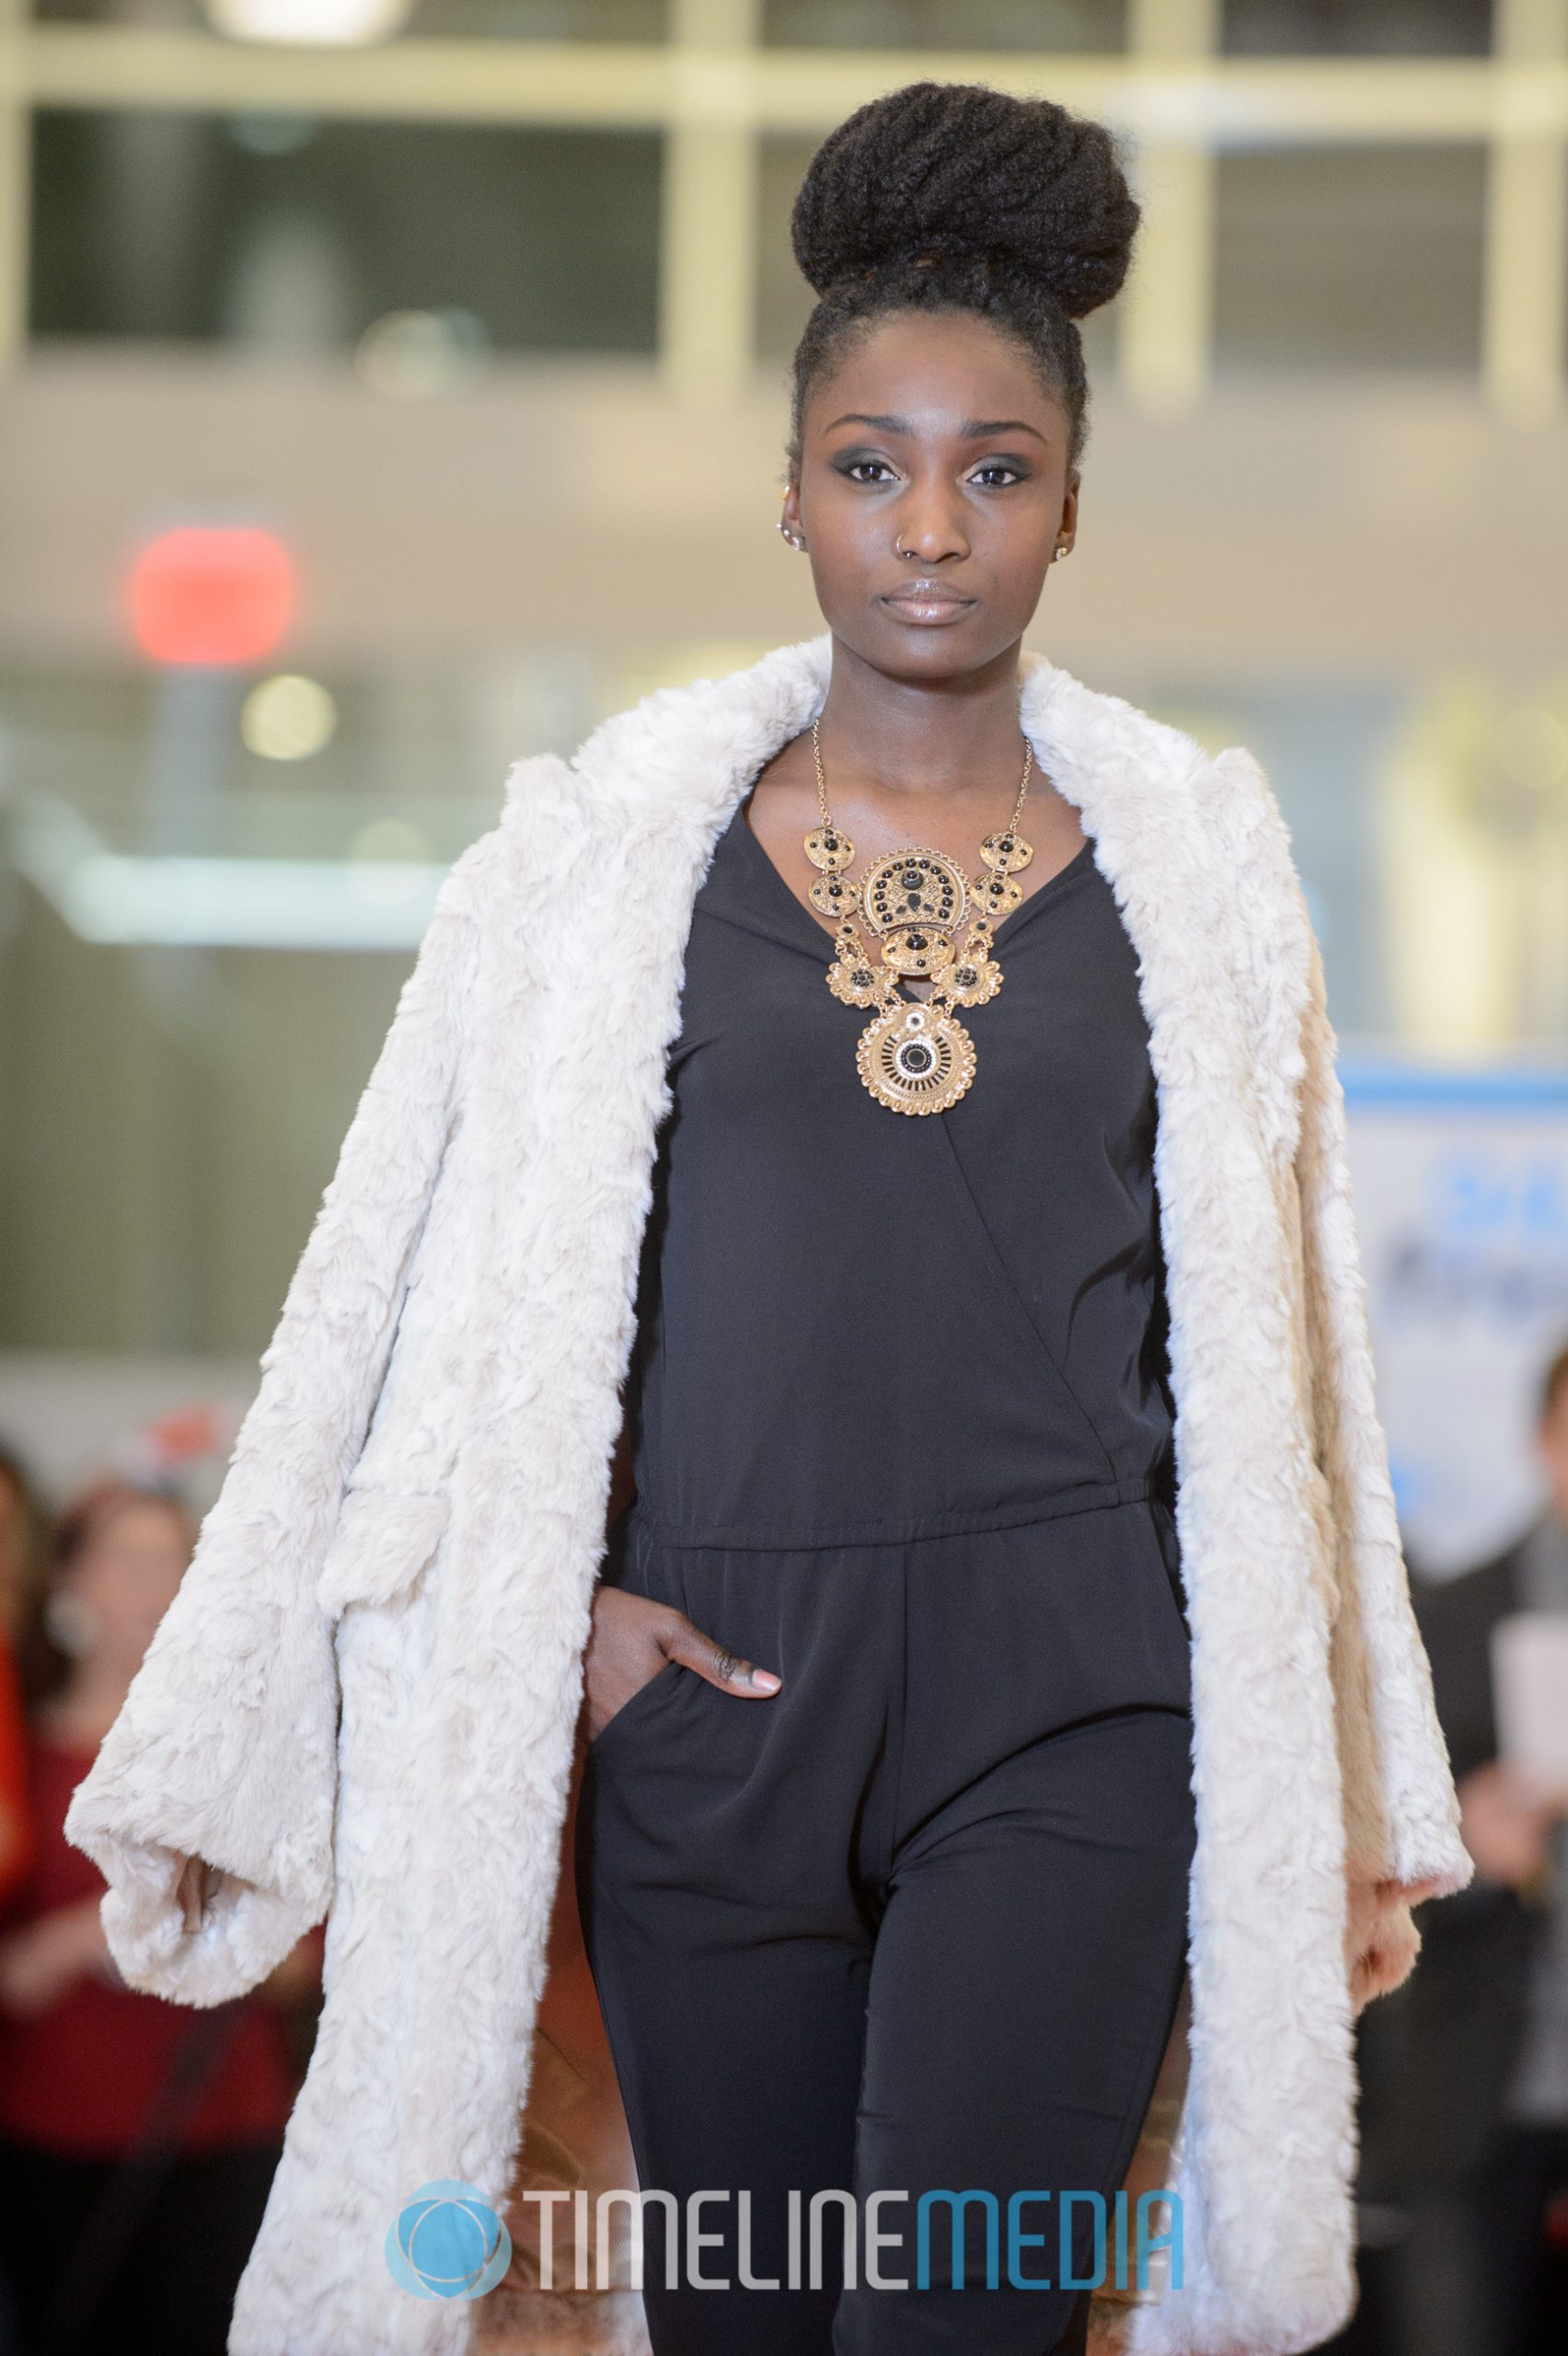 Runway model at the Tysons Corner Center Lord and Taylor holiday fashion show